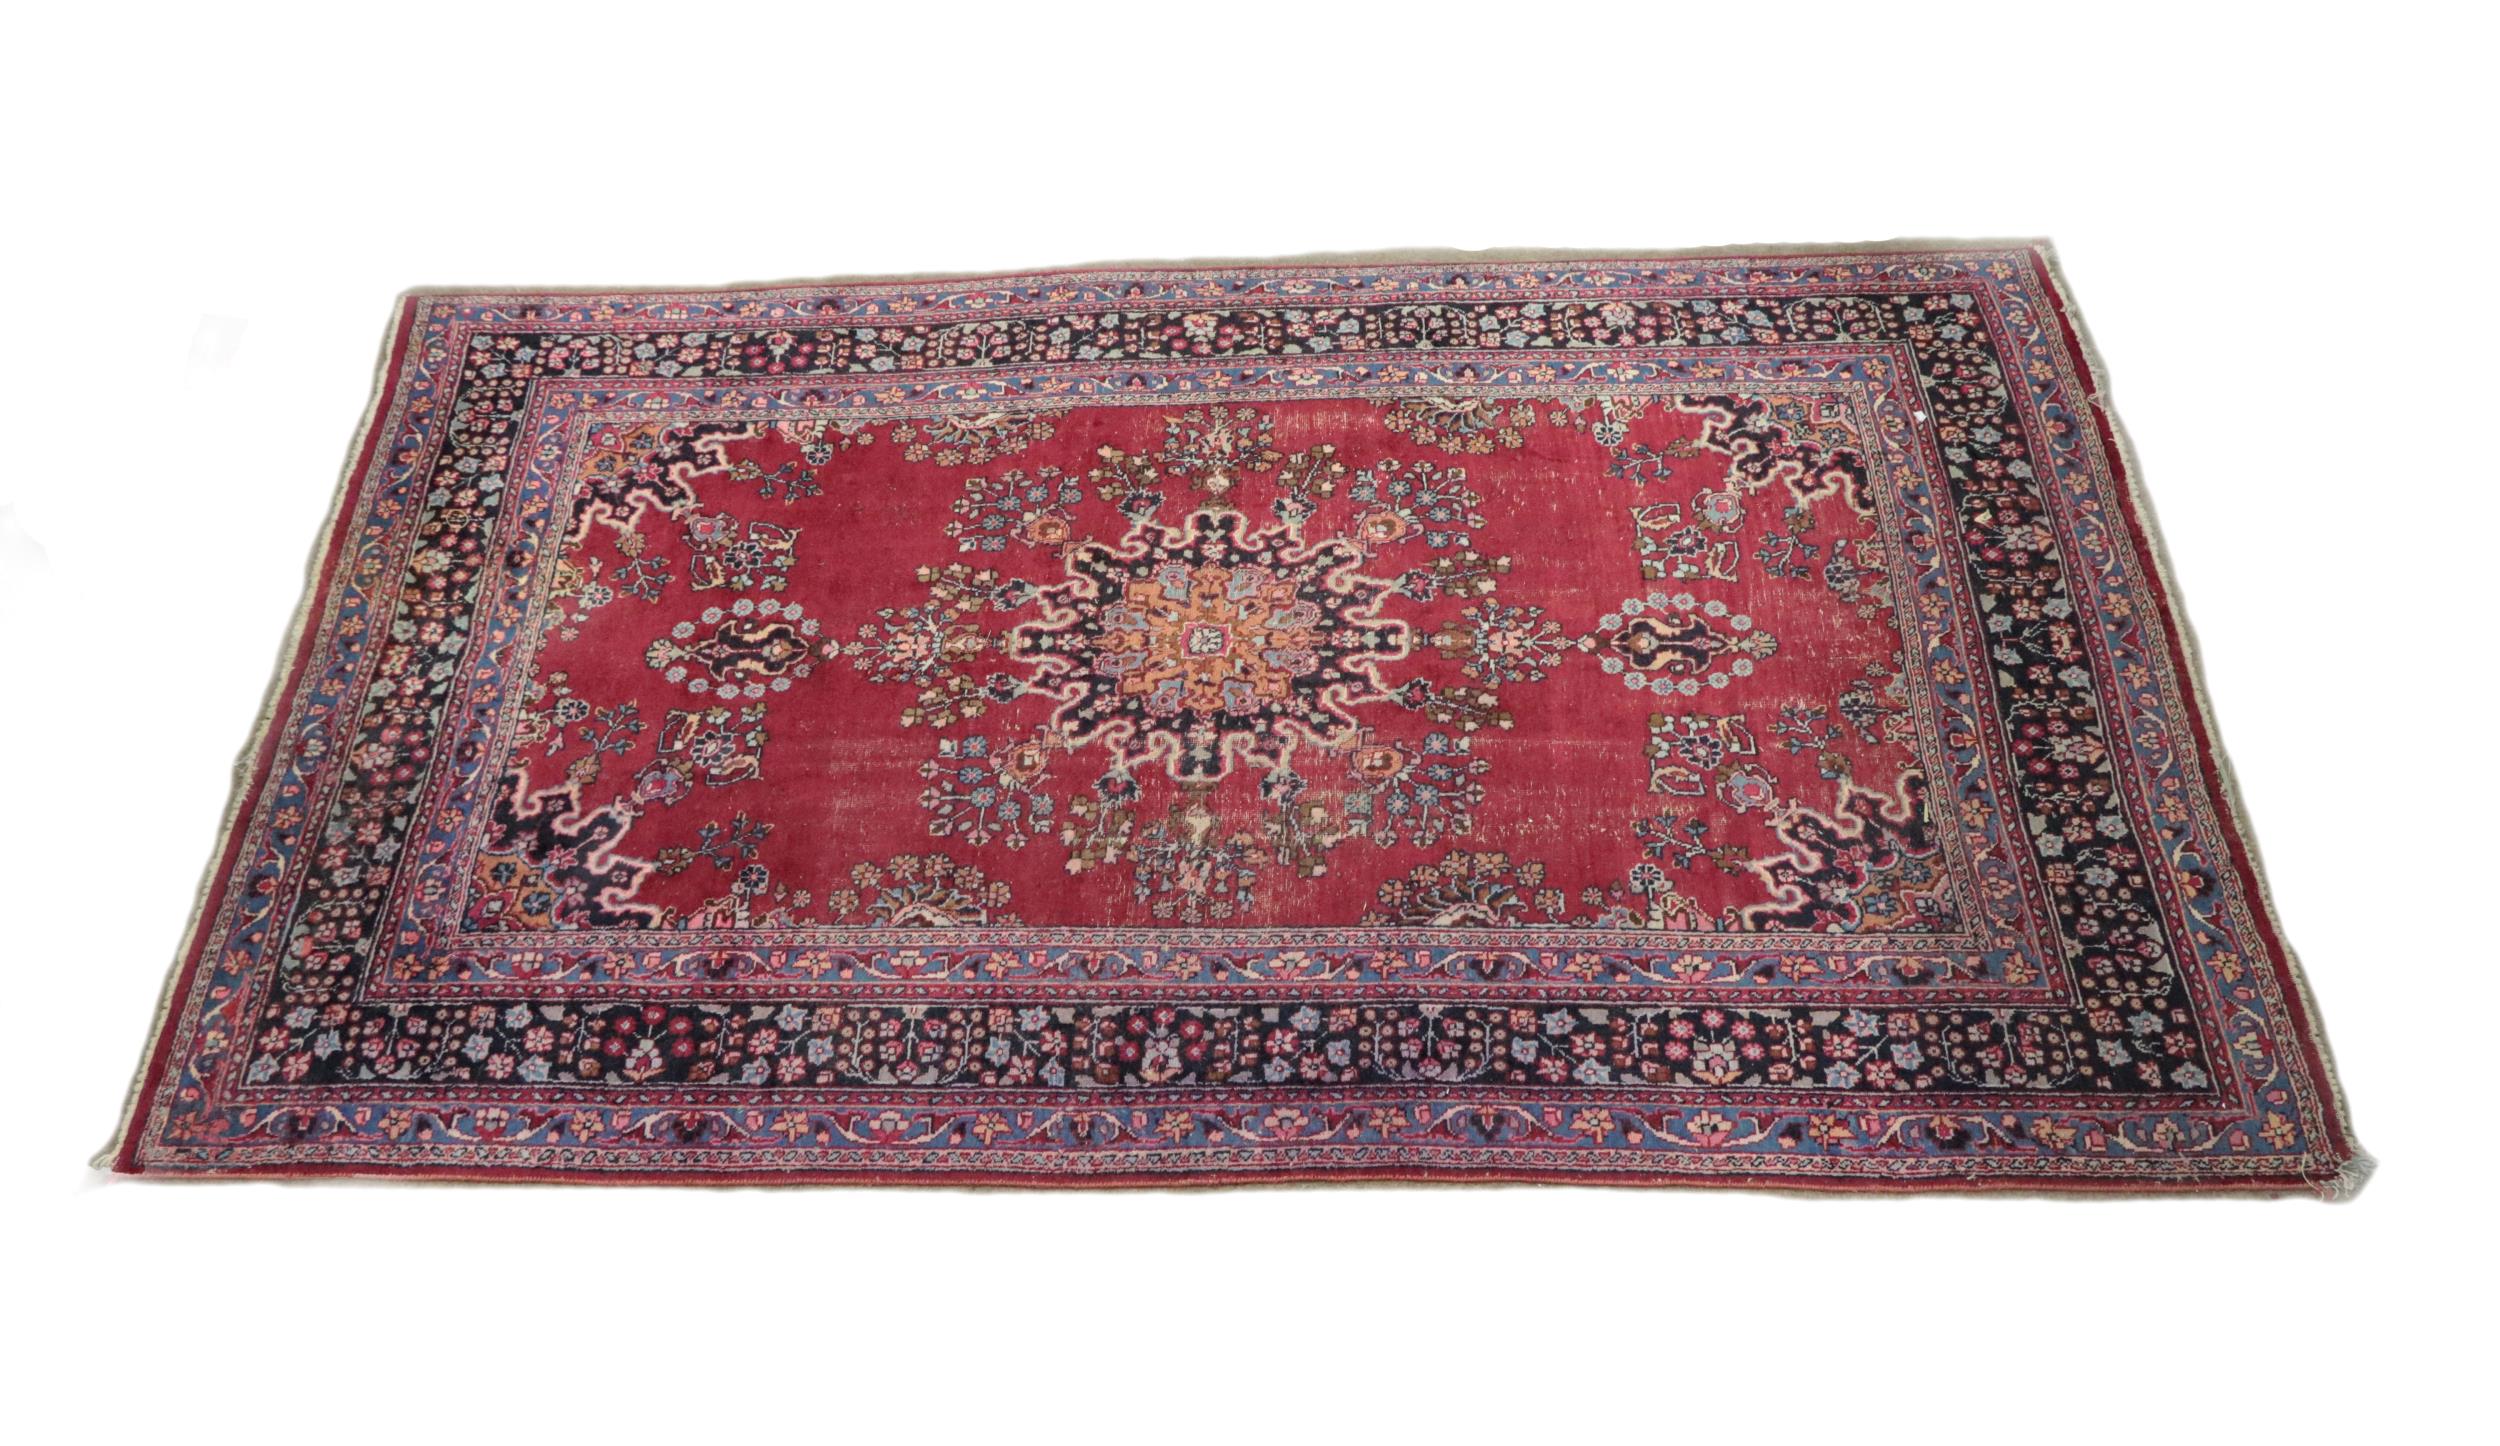 A large semi-antique Middle Eastern design burgundy ground woolen Carpet, the centre section with